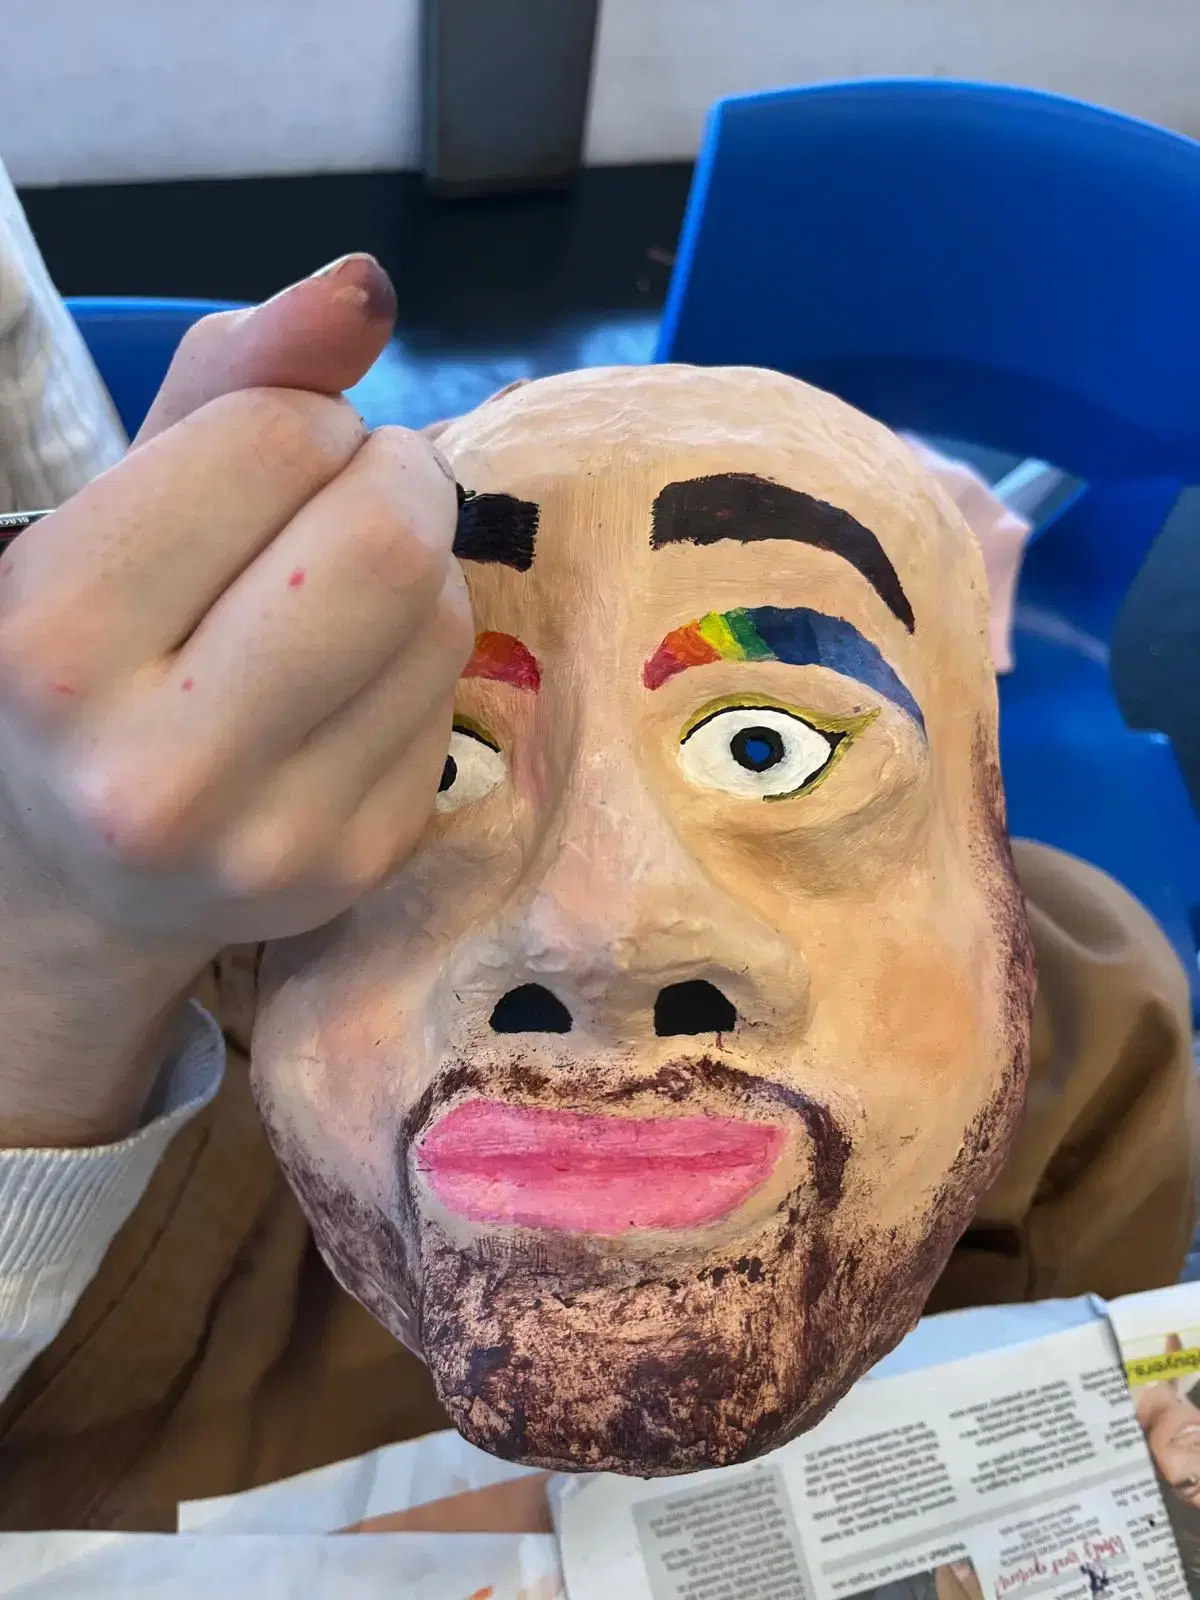 A hand holds up a handmade mask featuring a painted face with colorful eyebrows and pink lips, possibly a work-in-progress art project.